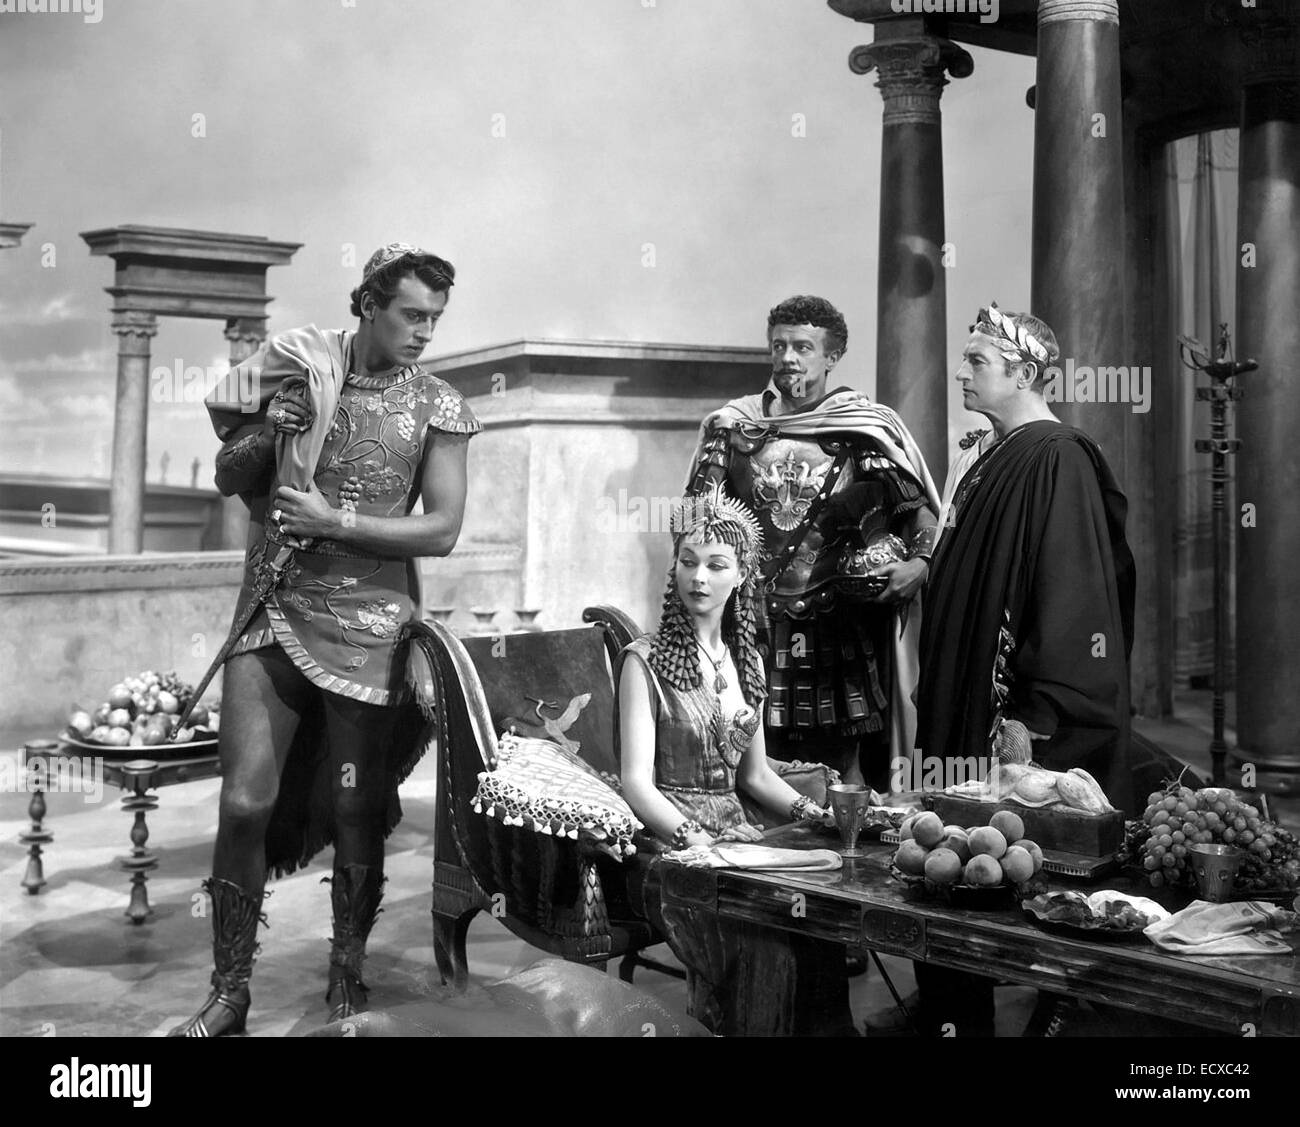 ANTHONY AND CLEOPATRA 1946 Gabriel Pascal productions film From l: Stewart Grainger as Apollodorus, Vivien Leigh as Cleopatra, Basil Sydney as Rufio, Claude Raines  as Caesar Stock Photo